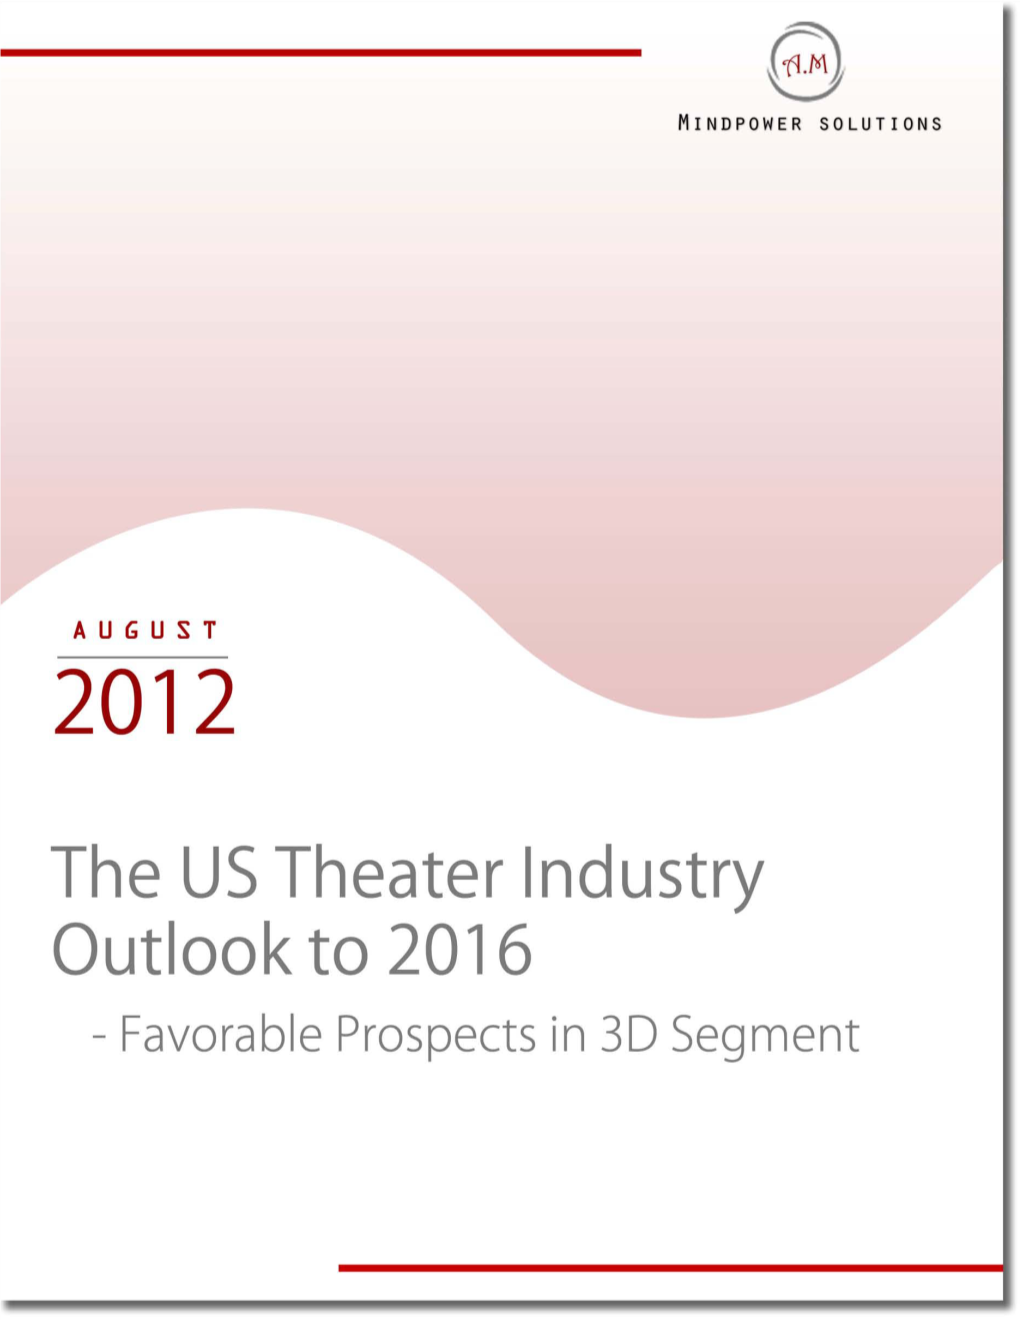 The US Theater Industry Outlook to 2016